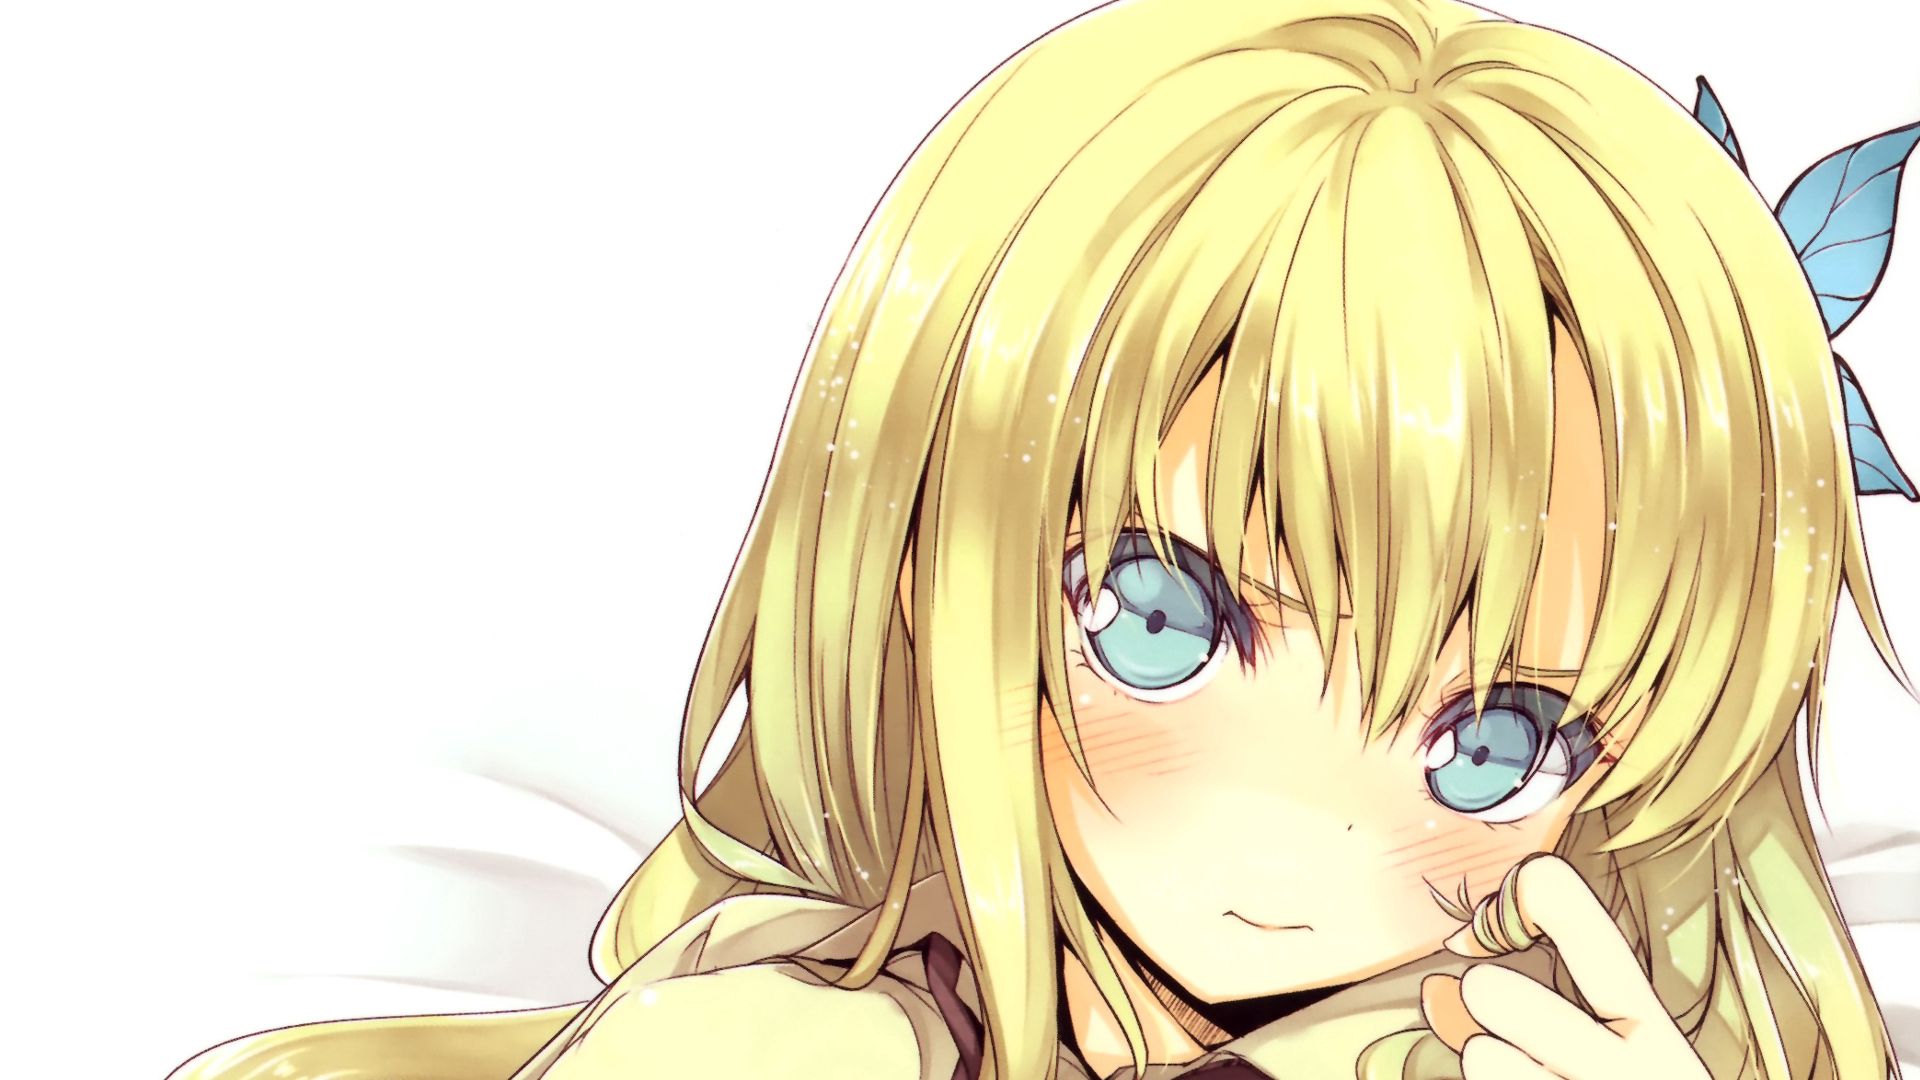 blonde, pretty, anime, sight, opinion, girl Aesthetic wallpaper